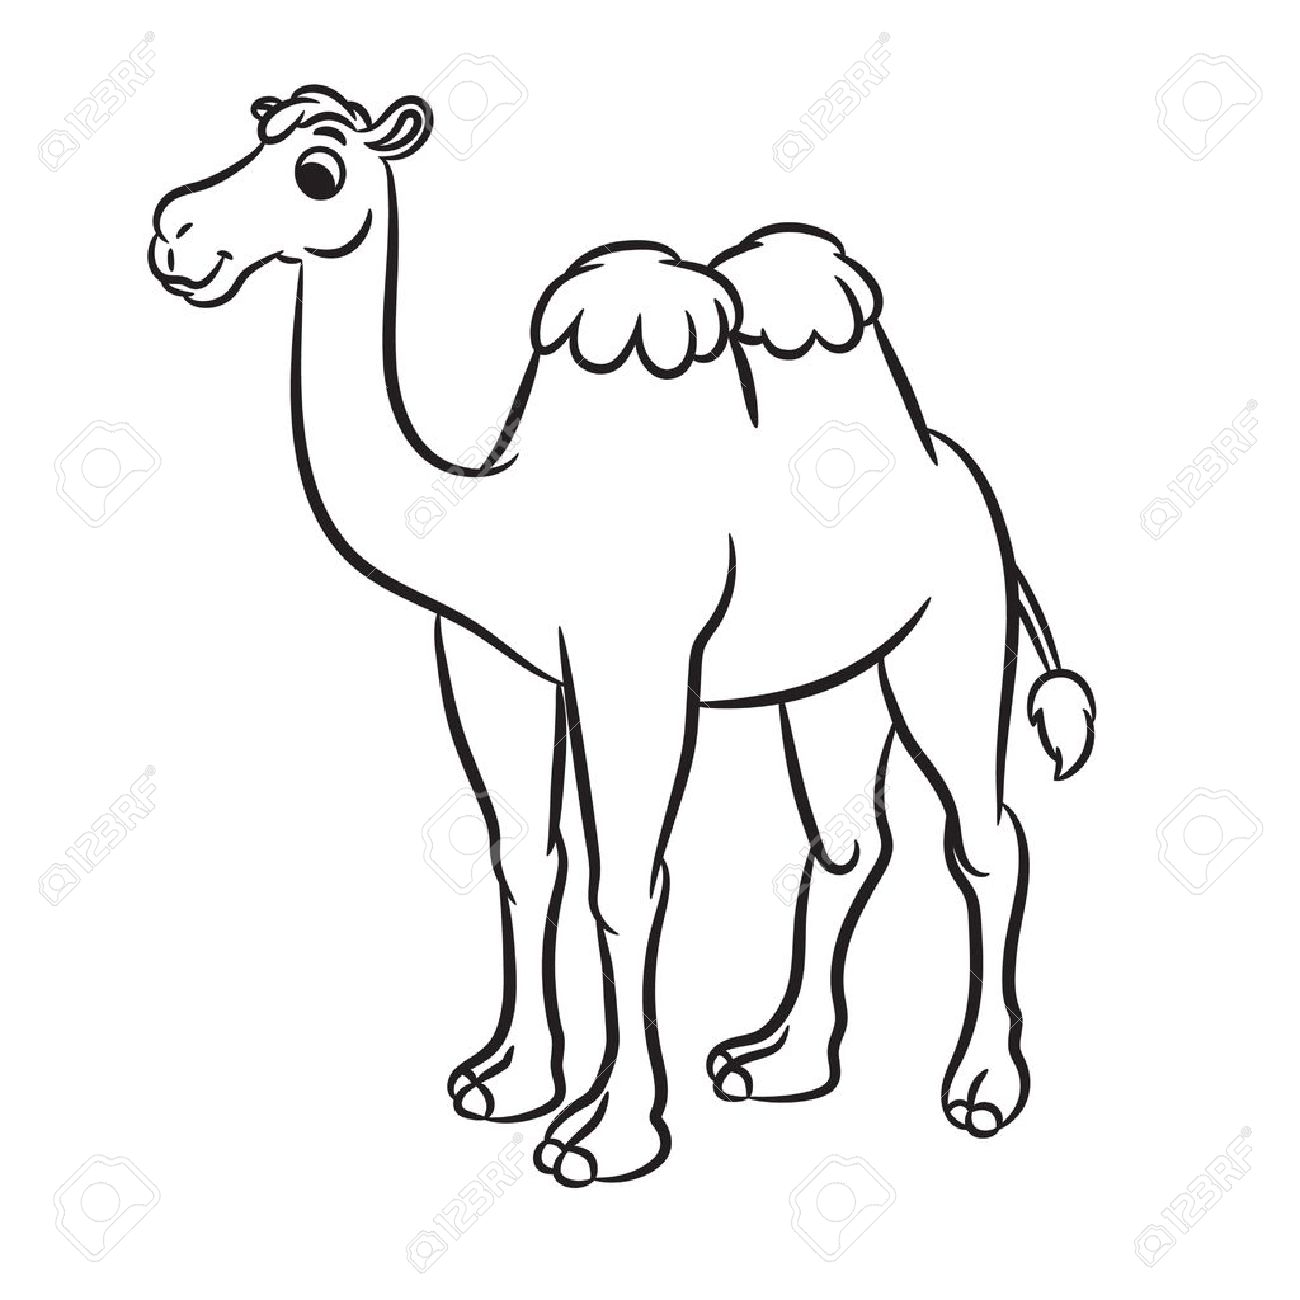 Camel clipart black and white, Camel black and white